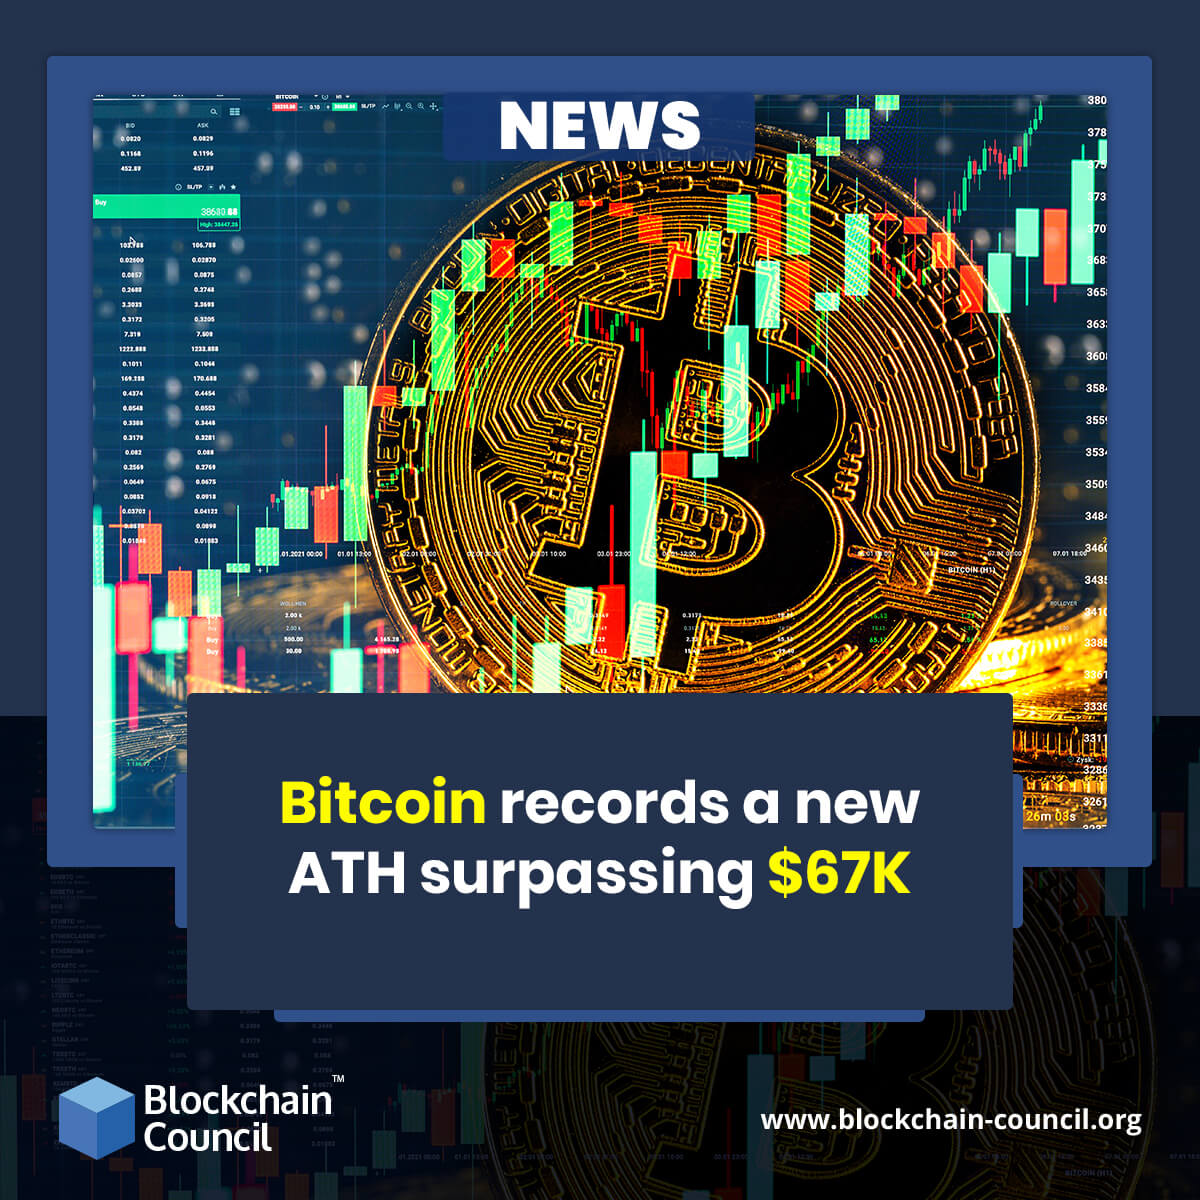 Bitcoin records a new ATH surpassing $67K